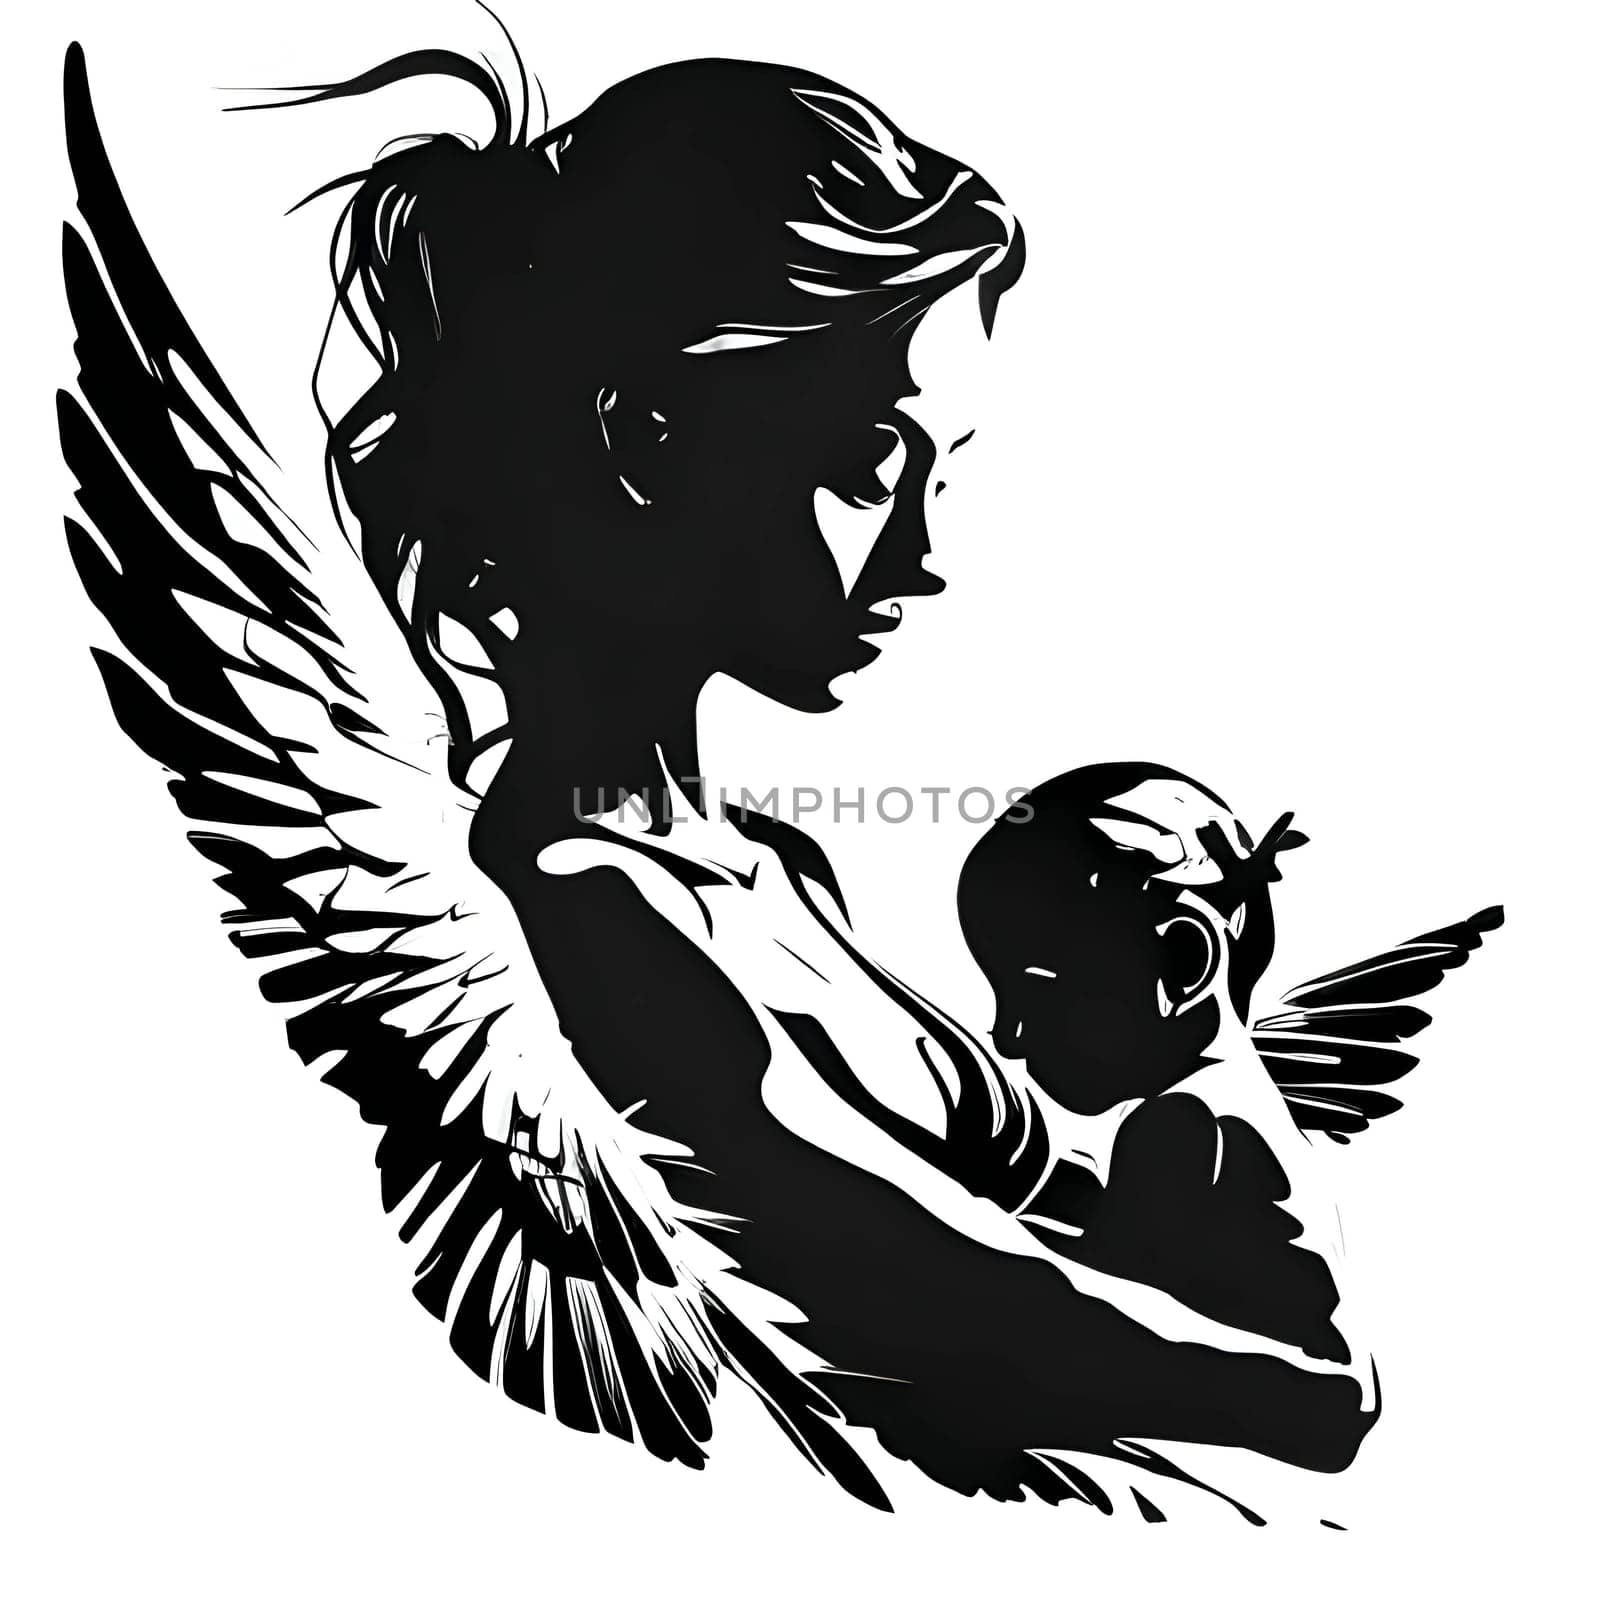 Vector illustration of a woman and baby in black silhouette against a clean white background, capturing graceful forms. by ThemesS